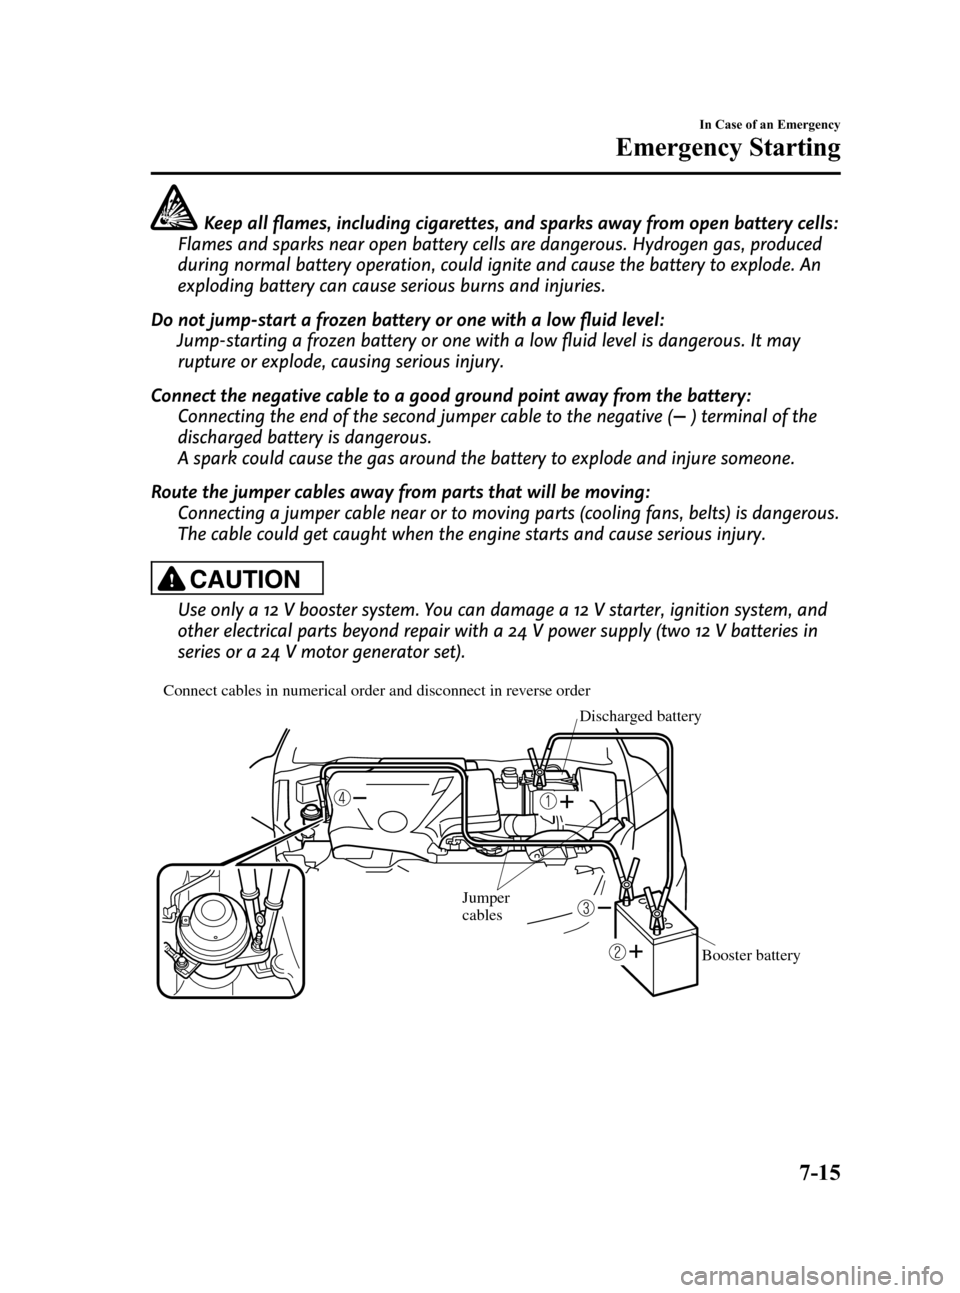 MAZDA MODEL CX-7 2009  Owners Manual (in English) Black plate (329,1)
Keep all flames, including cigarettes, and sparks away from open battery cells:
Flames and sparks near open battery cells are dangerous. Hydrogen gas, produced
during normal batter